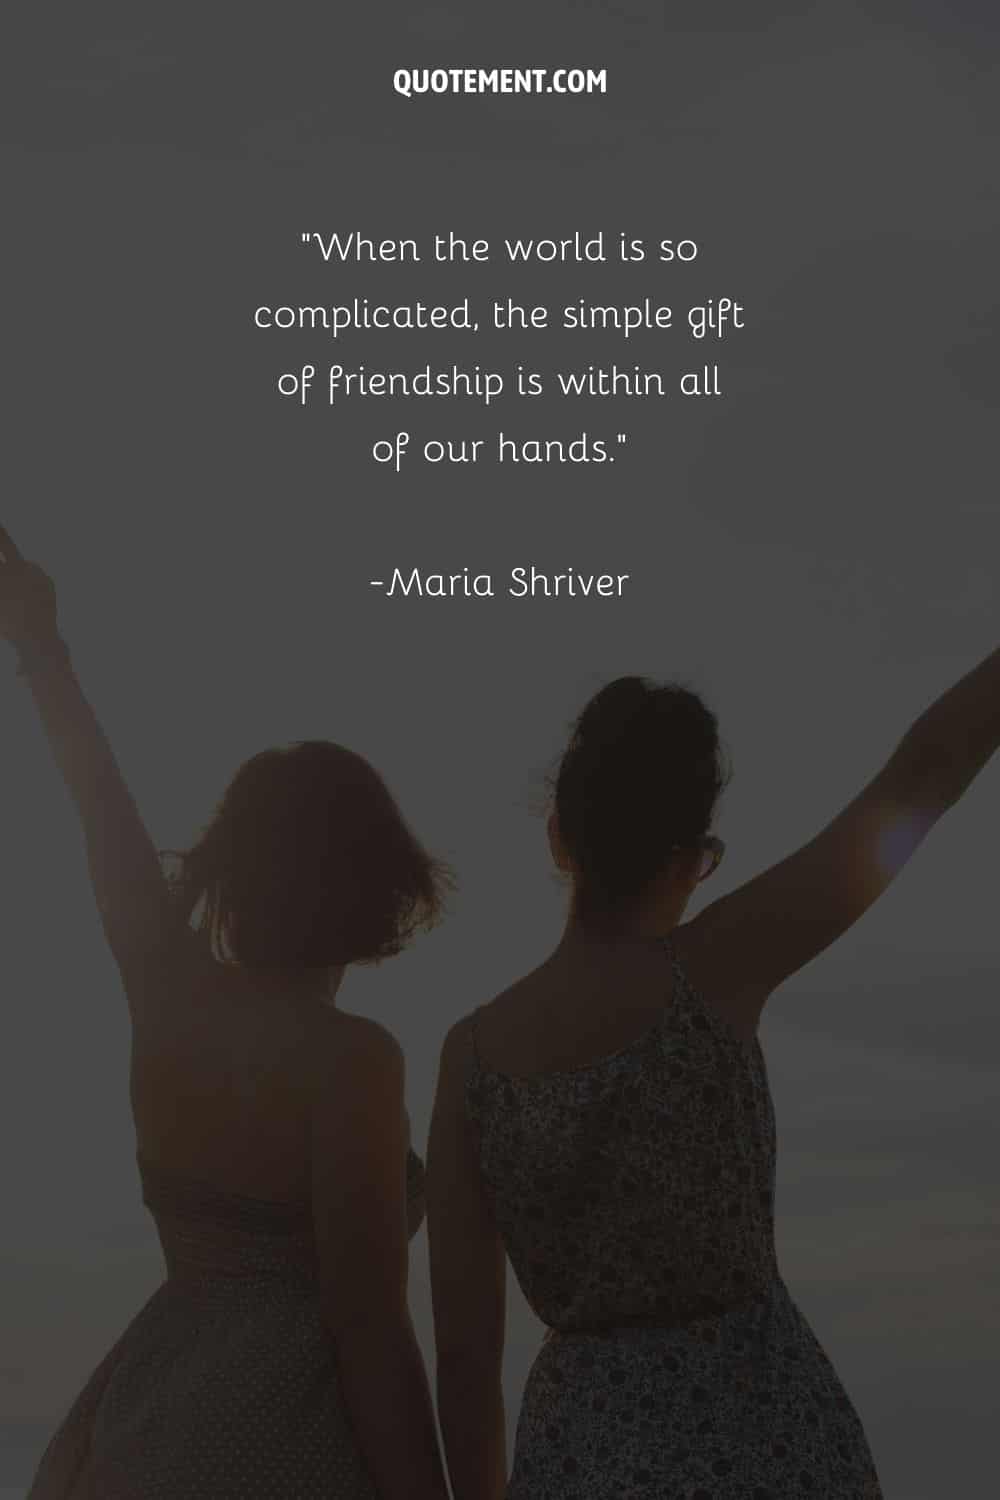 Image of two friends representing a quote of gift of friendship
